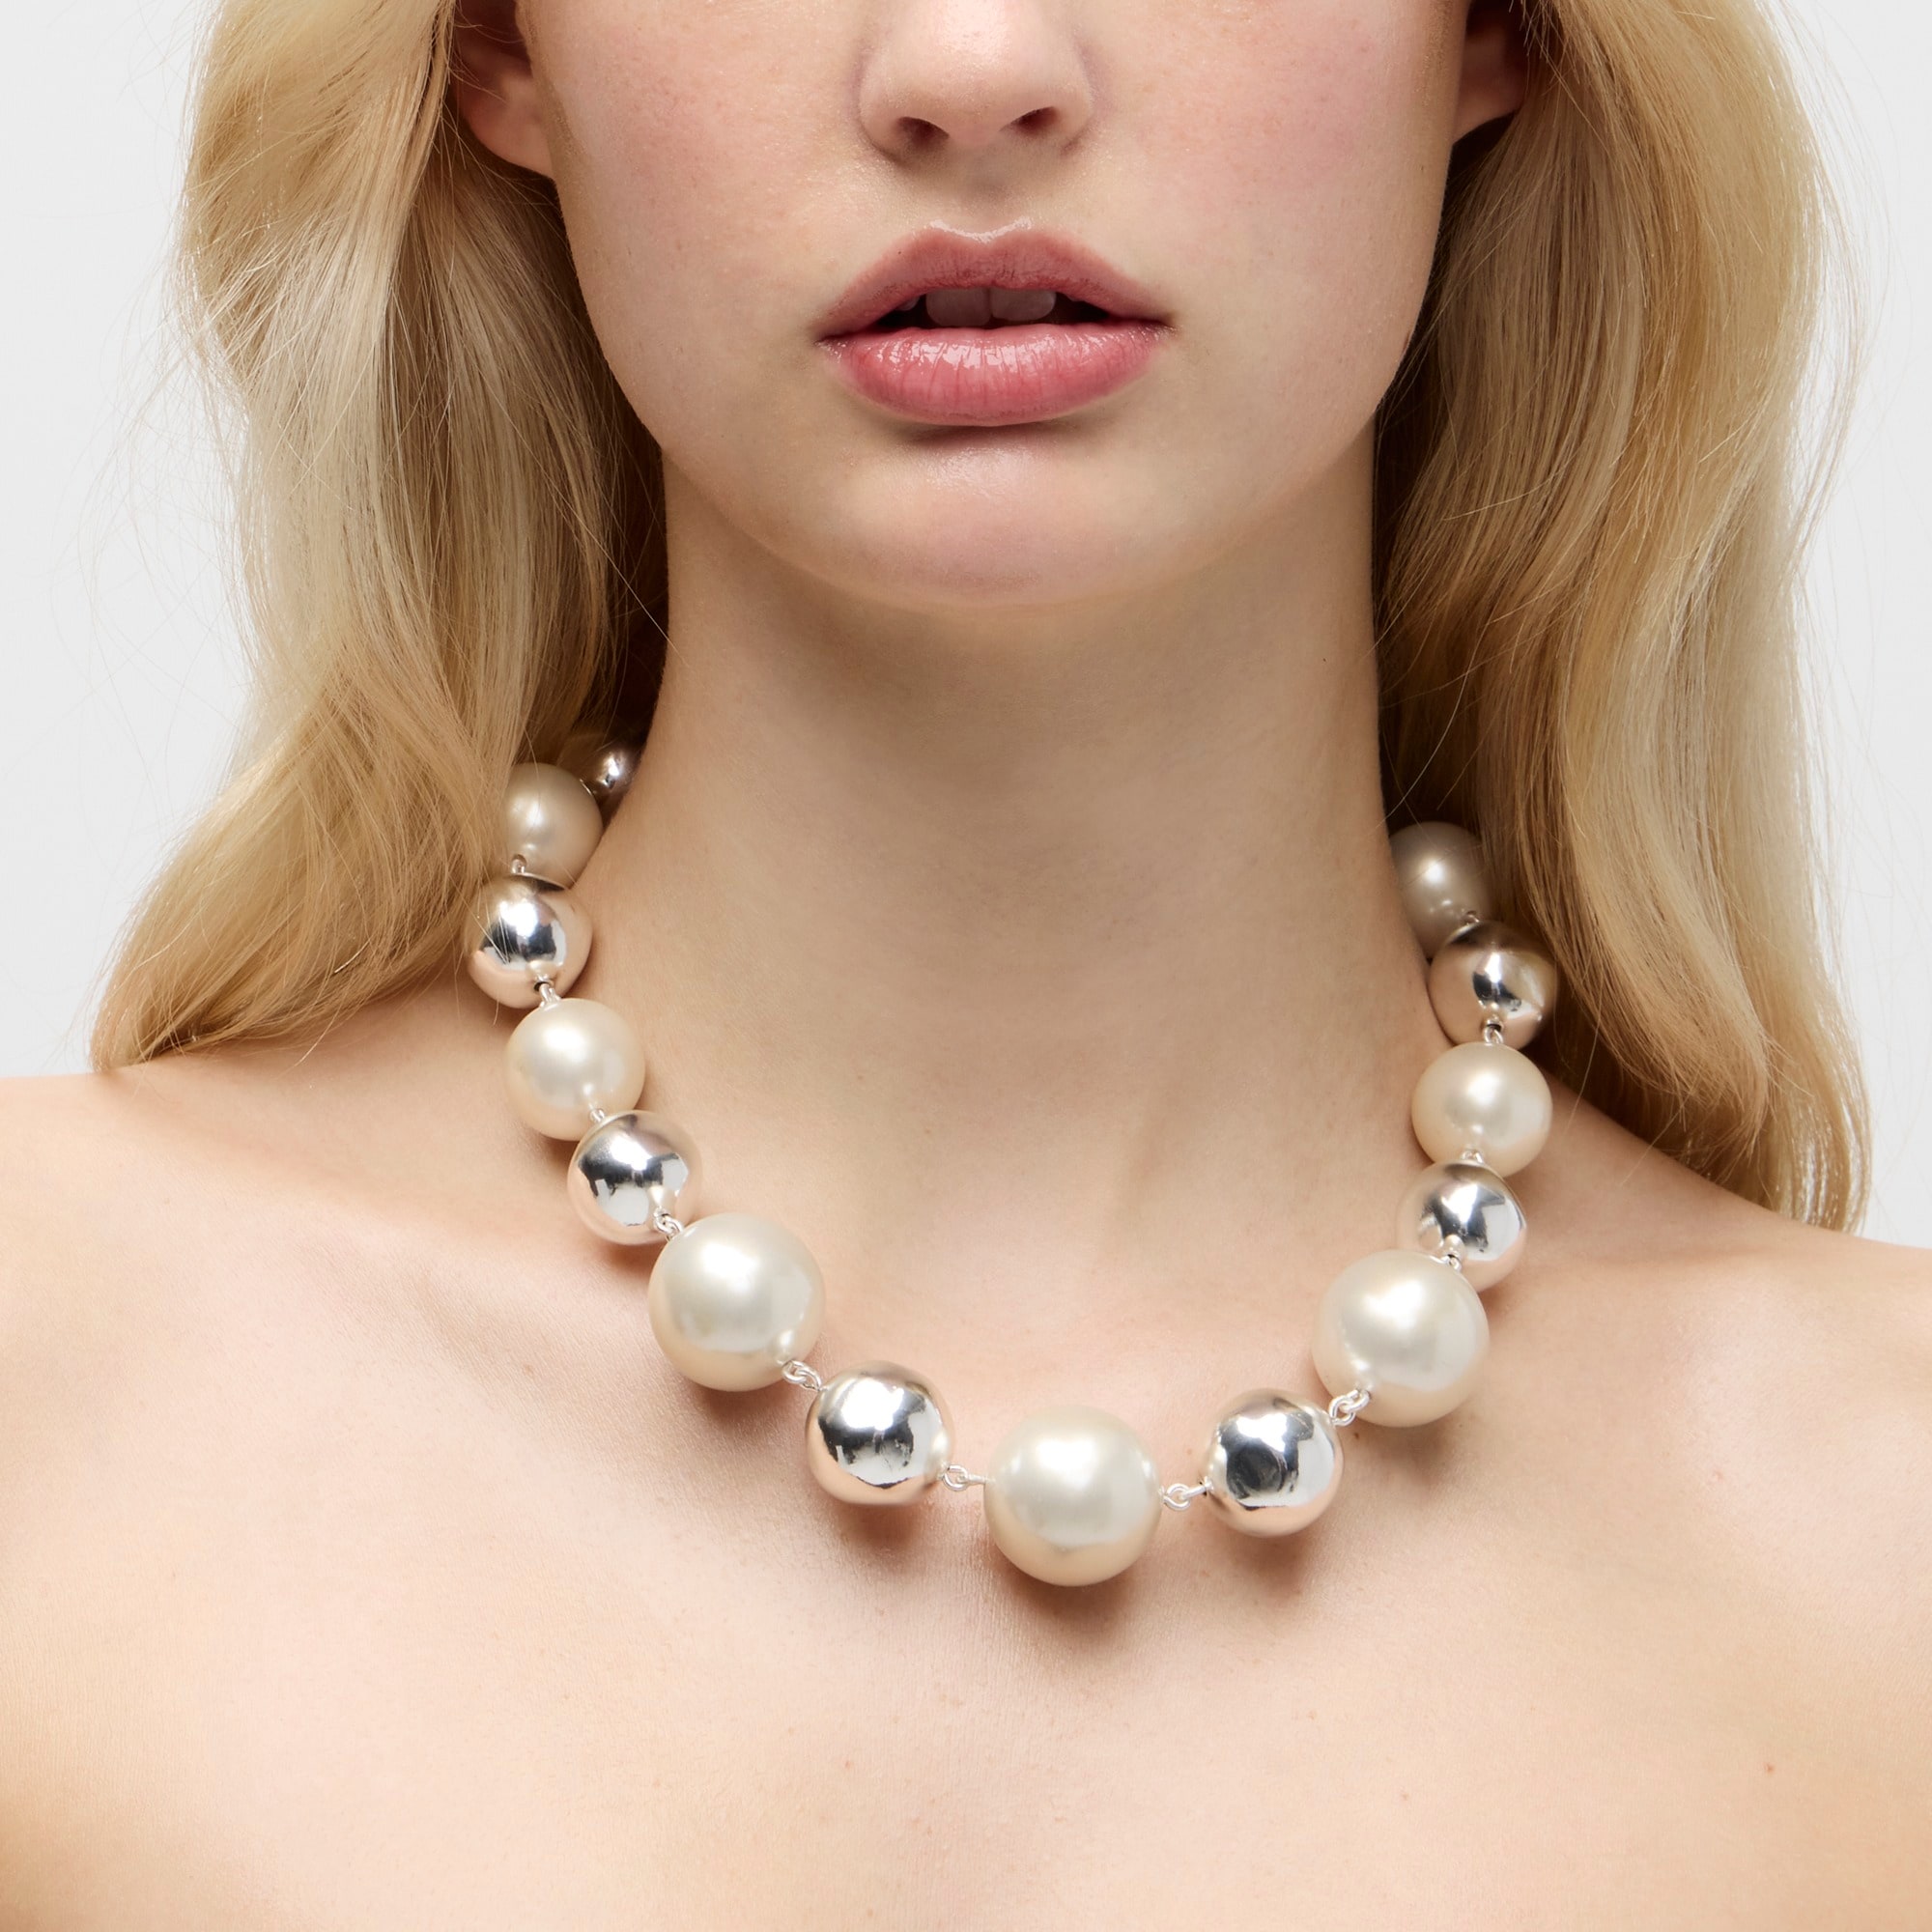 Jcrew Oversized metallic ball and pearl necklace